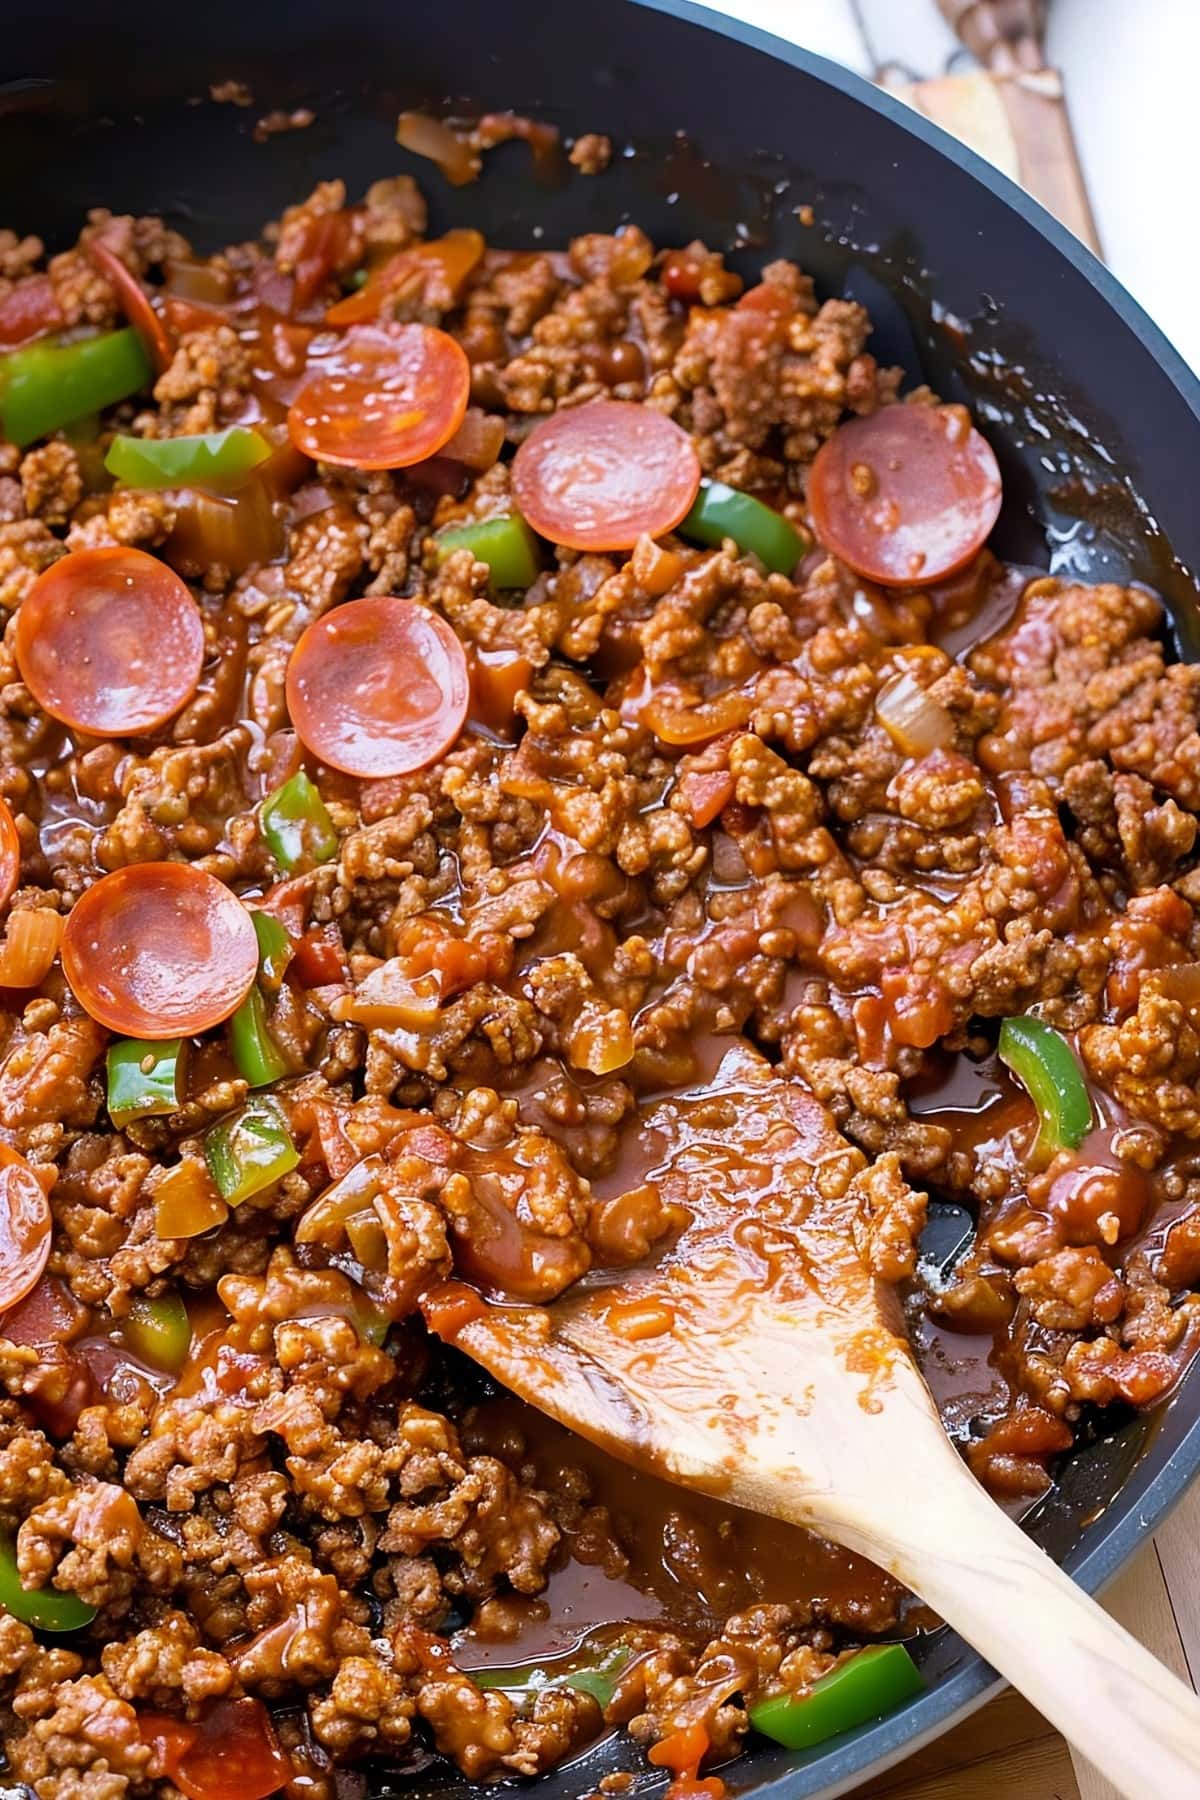 A skillet filled with saucy ground beef, peppers and onions